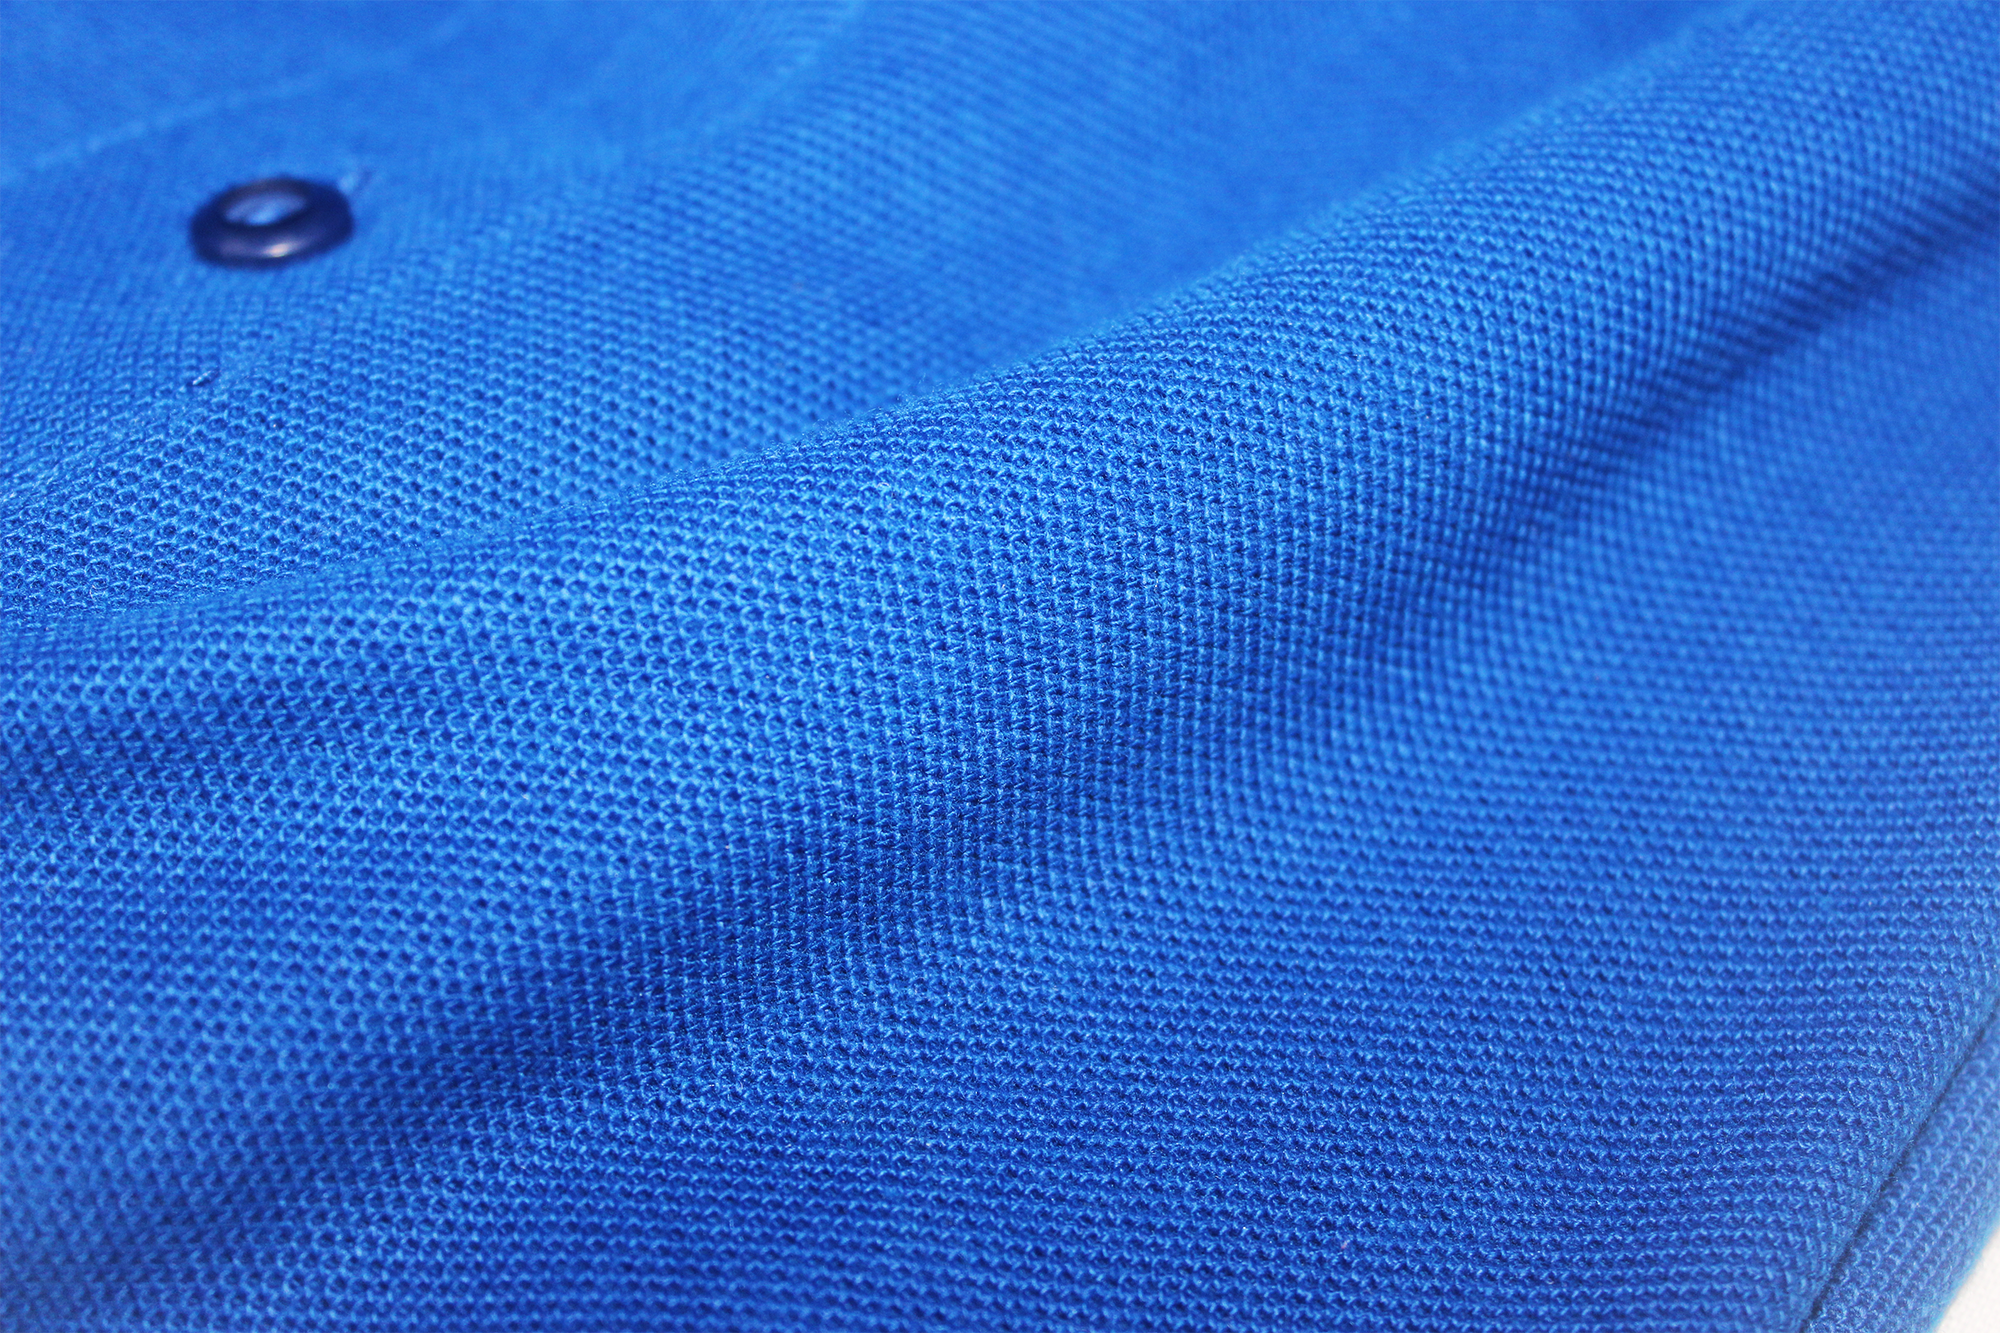 Blue Fabric image small size